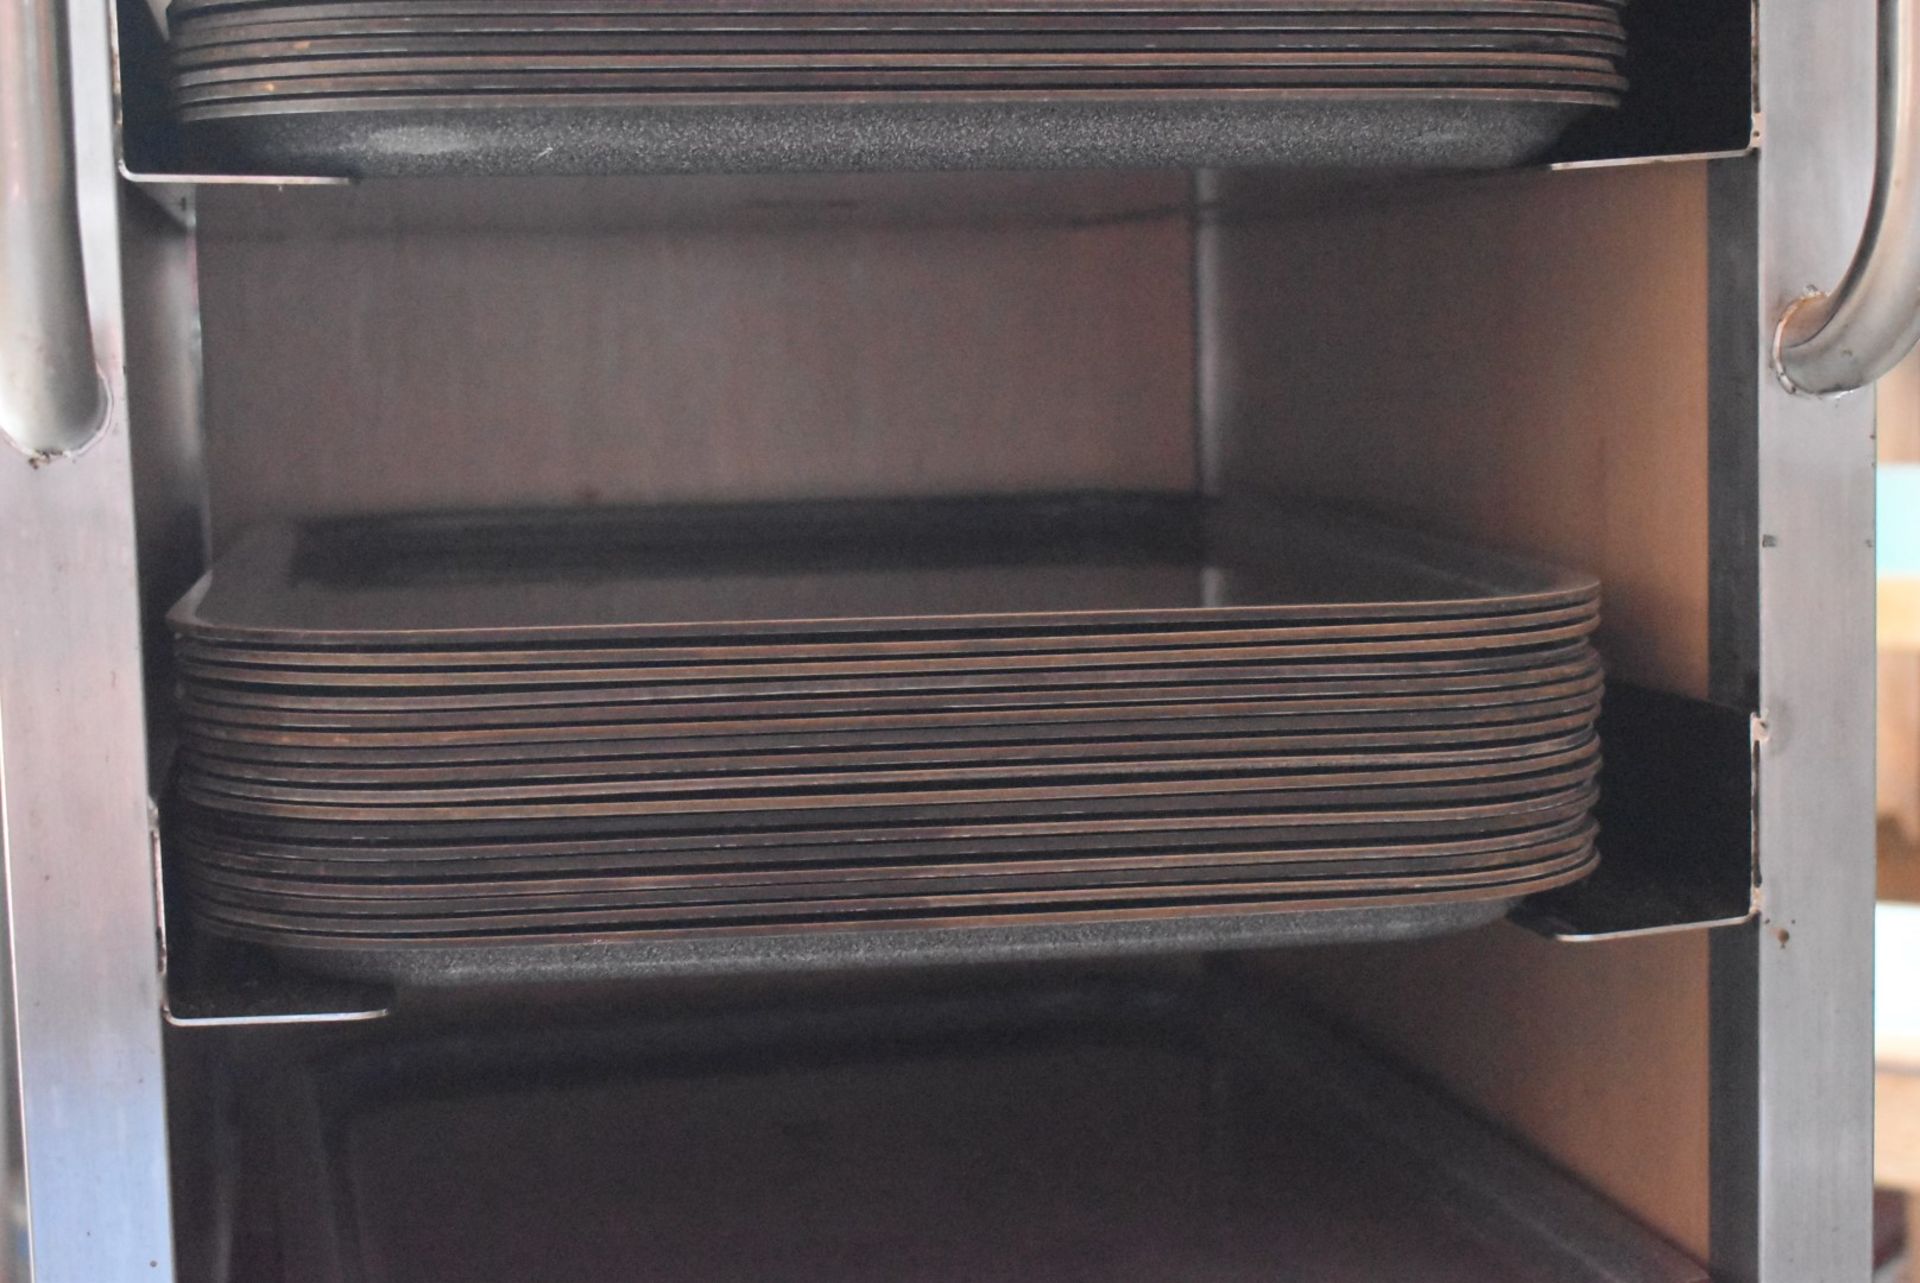 1 x Cafeteria Canteen Tray Stands With Approximately 80 x Food Trays - Recently Removed From Major S - Image 7 of 12